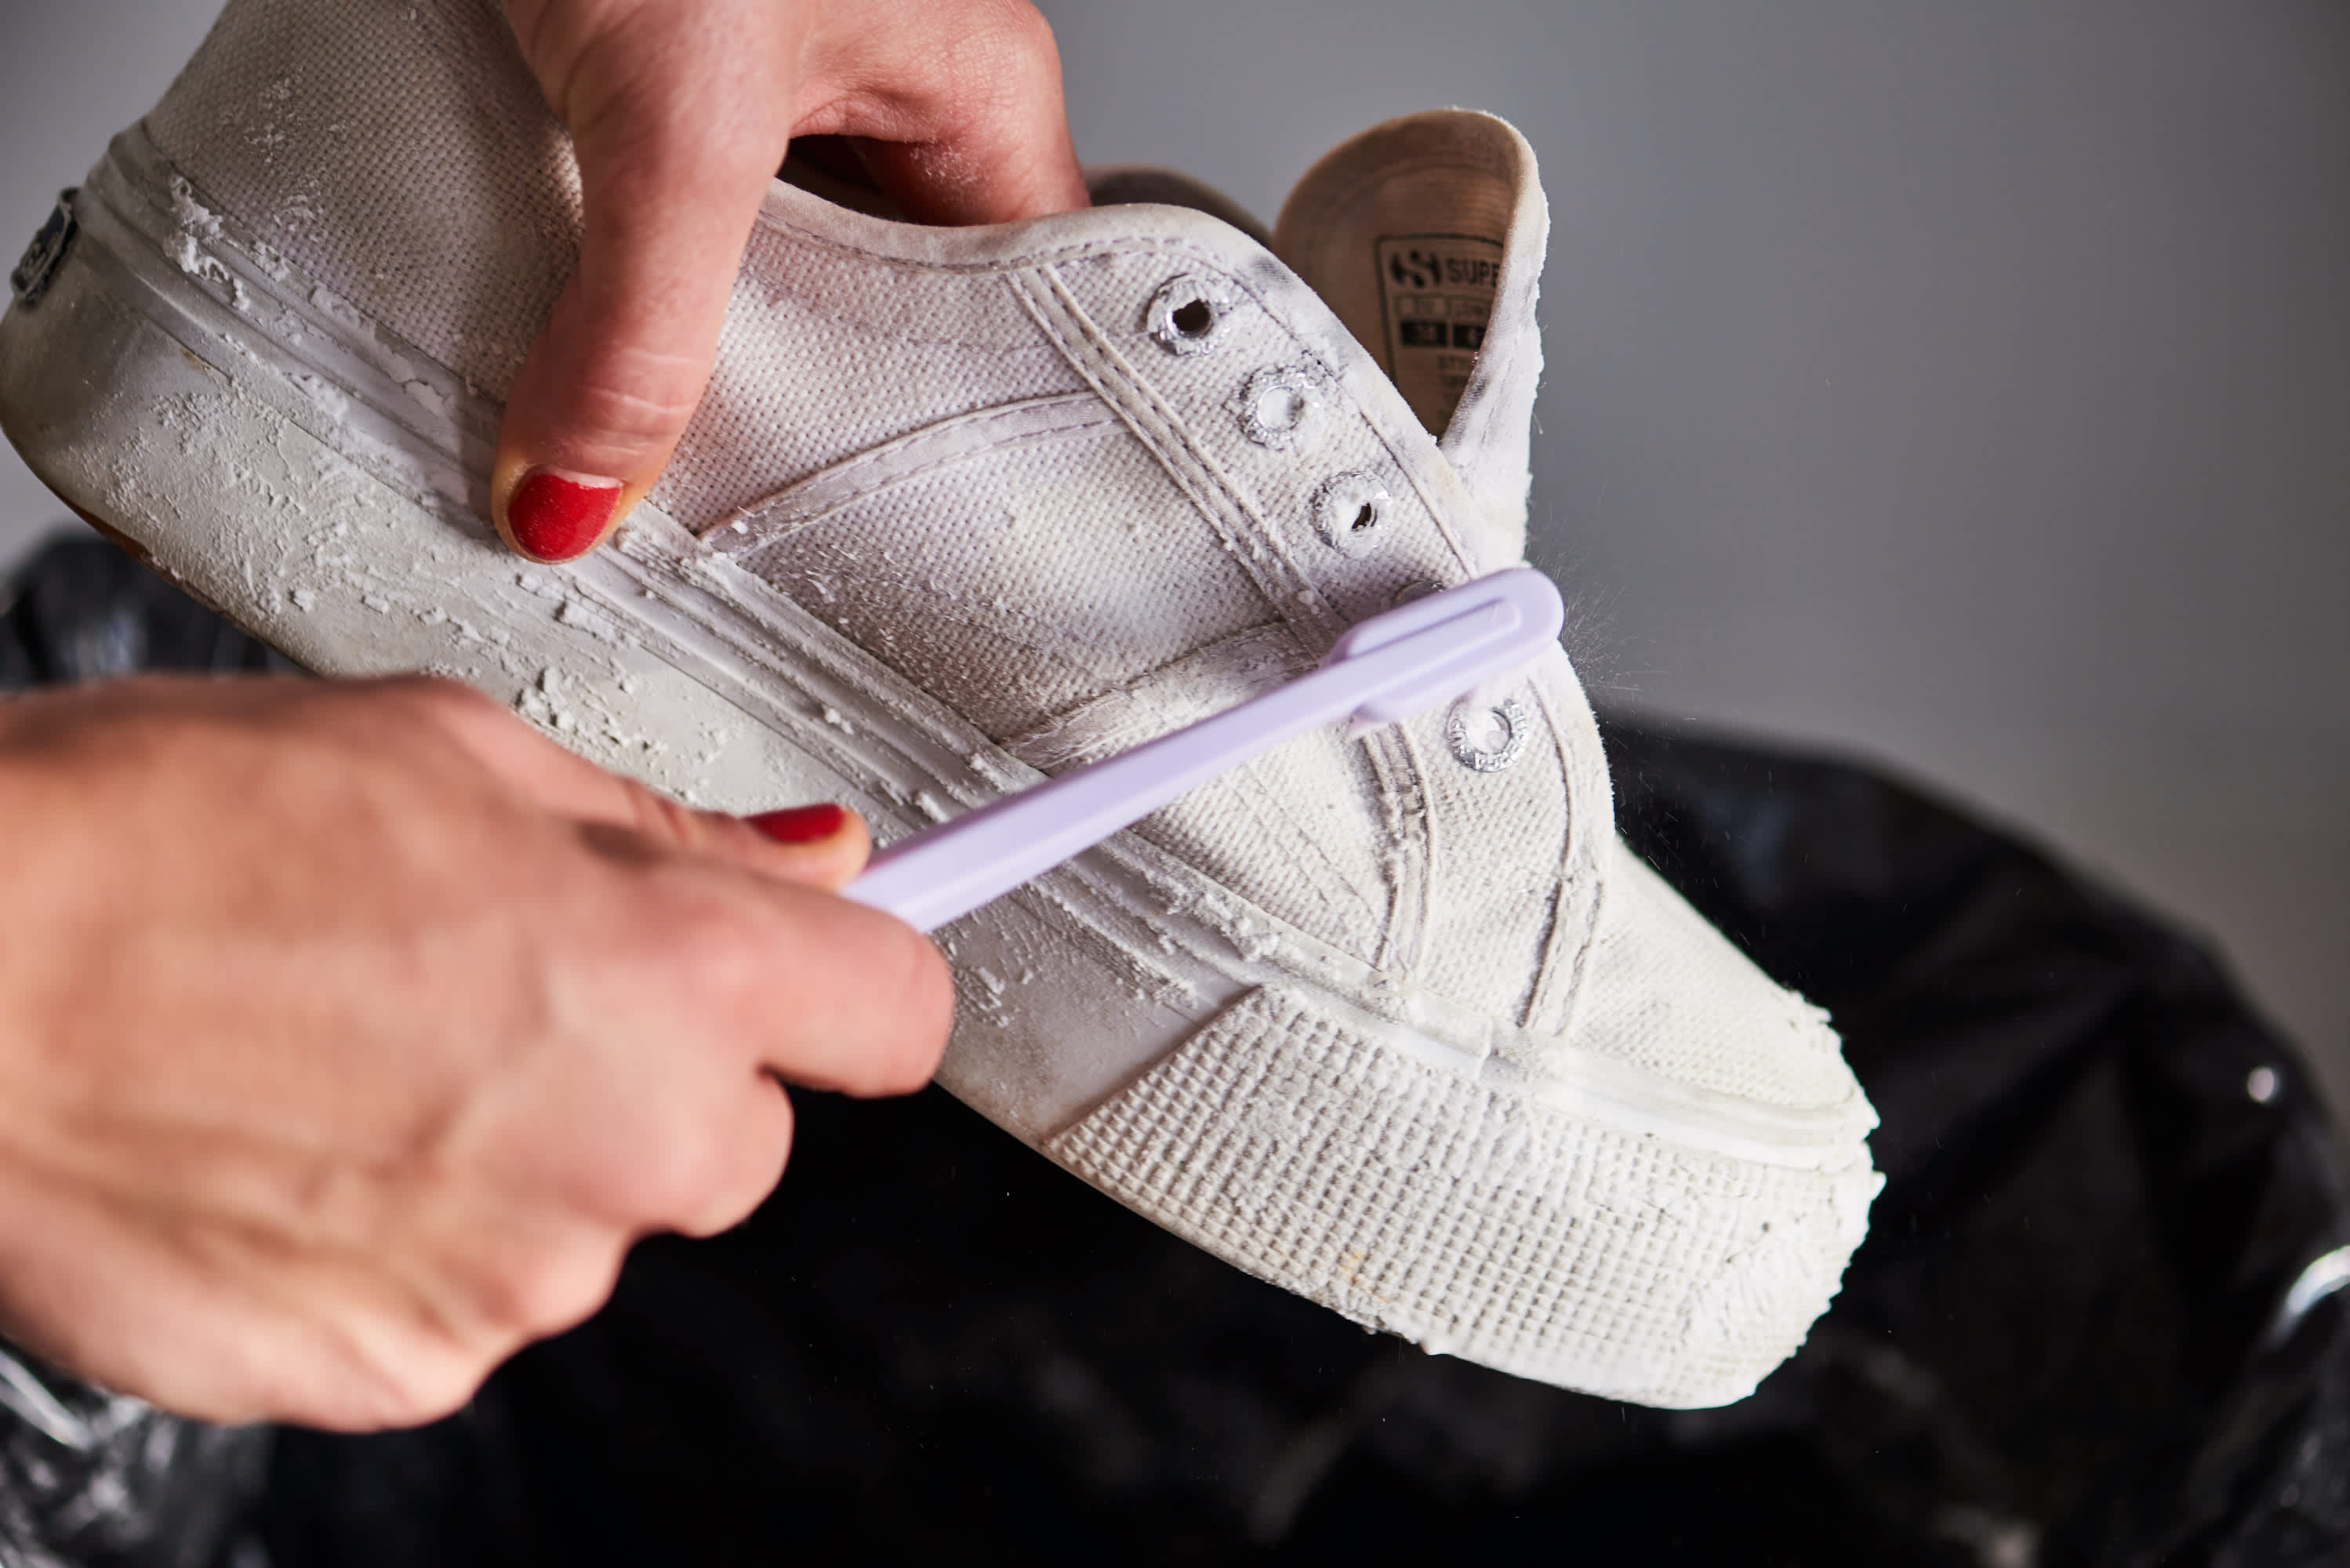 How to Clean Canvas Shoes | Kitchn